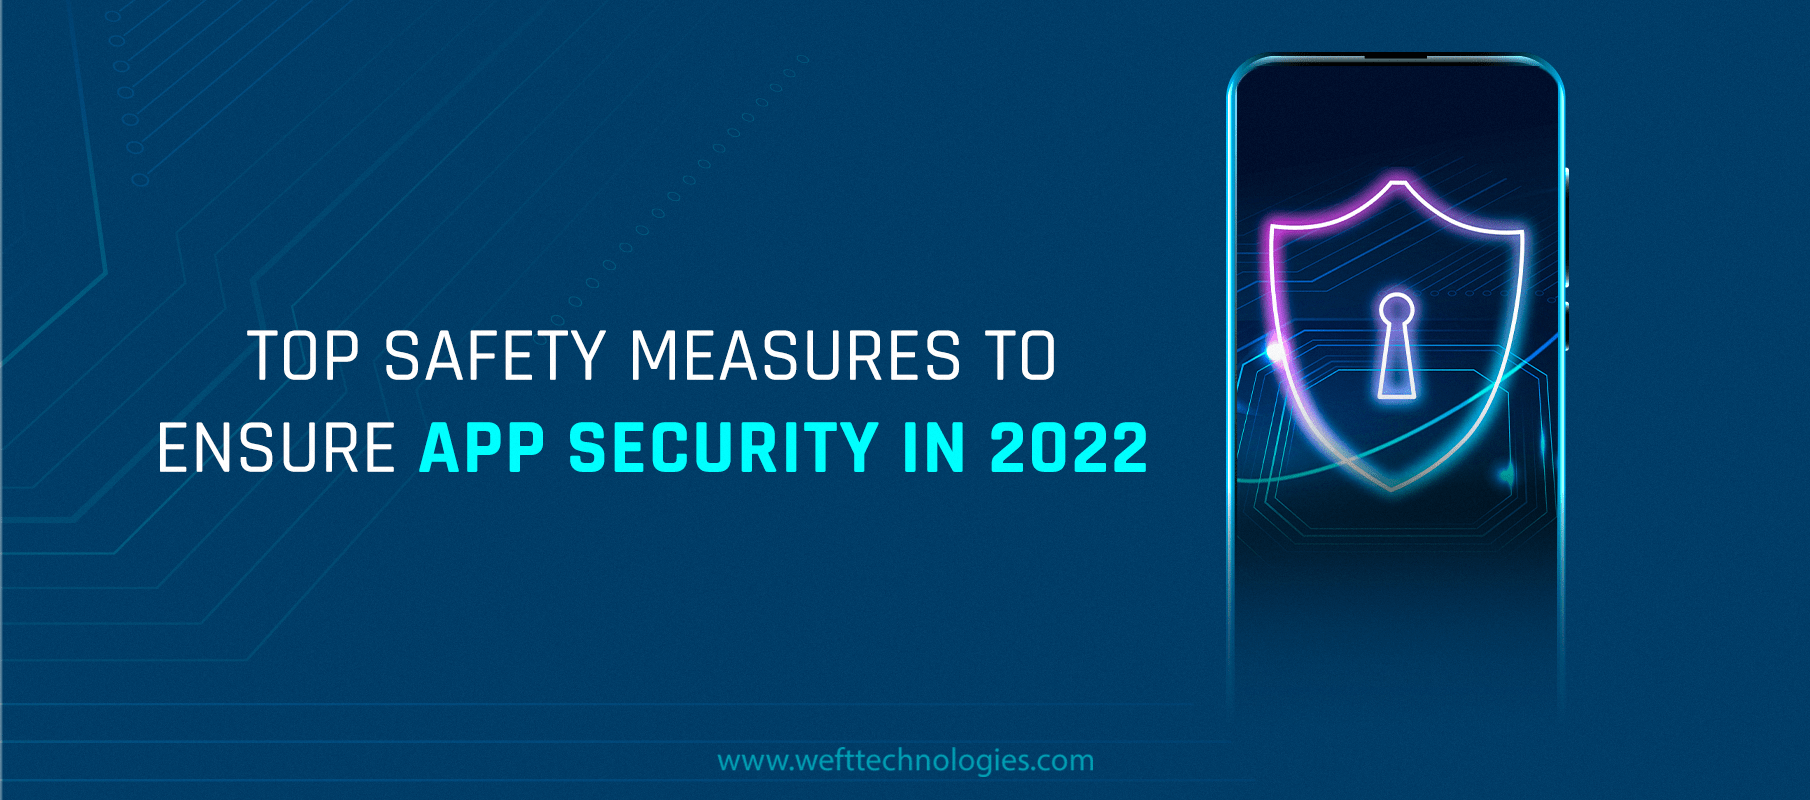 Top Safety Measures to Ensure App Security in 2022!